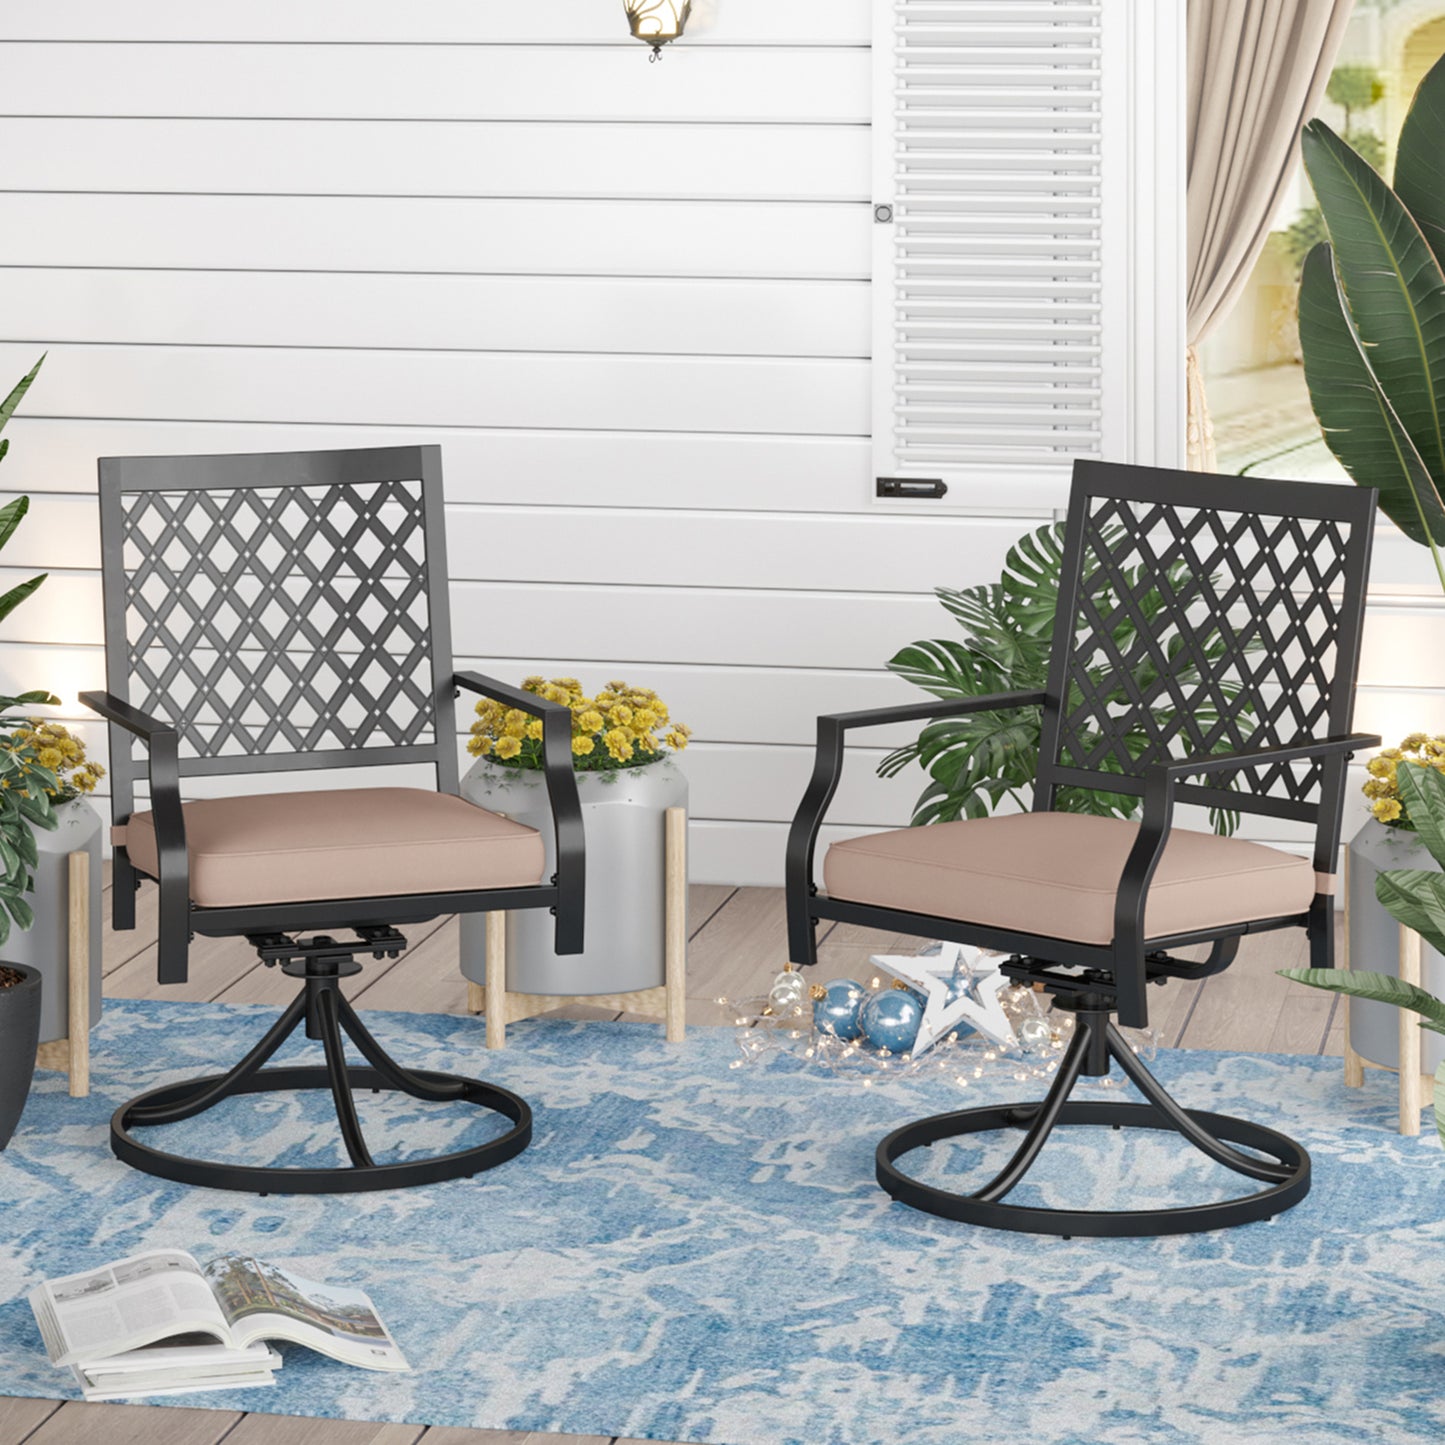 Sophia & William Outdoor Swivel Patio Chairs Set of 2 Dining Rocker Chair Support 300 lbs for Patio Garden Outdoor Dining Room Furniture Set with Cushion